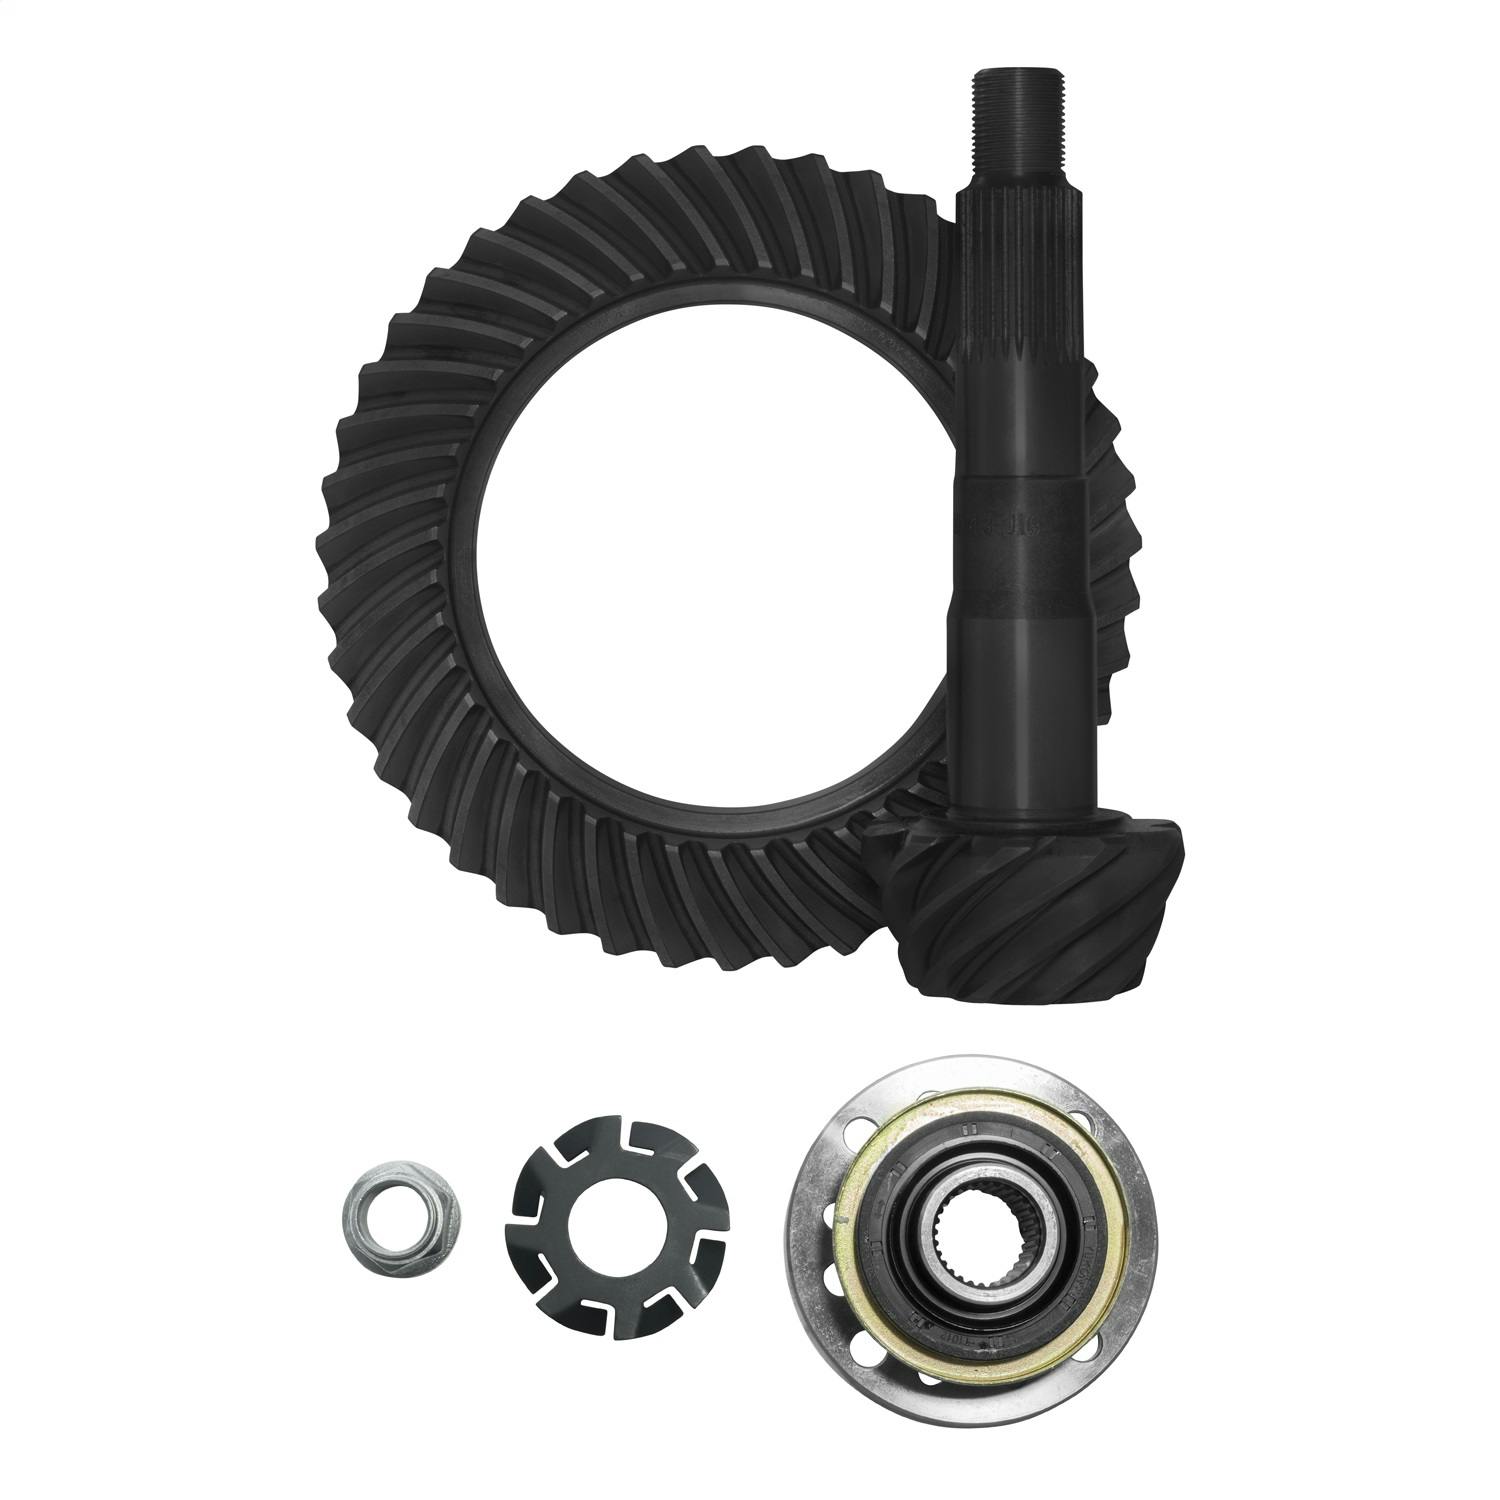 USA Standard Gear ZG TLCF-430RK Differential Ring and Pinion